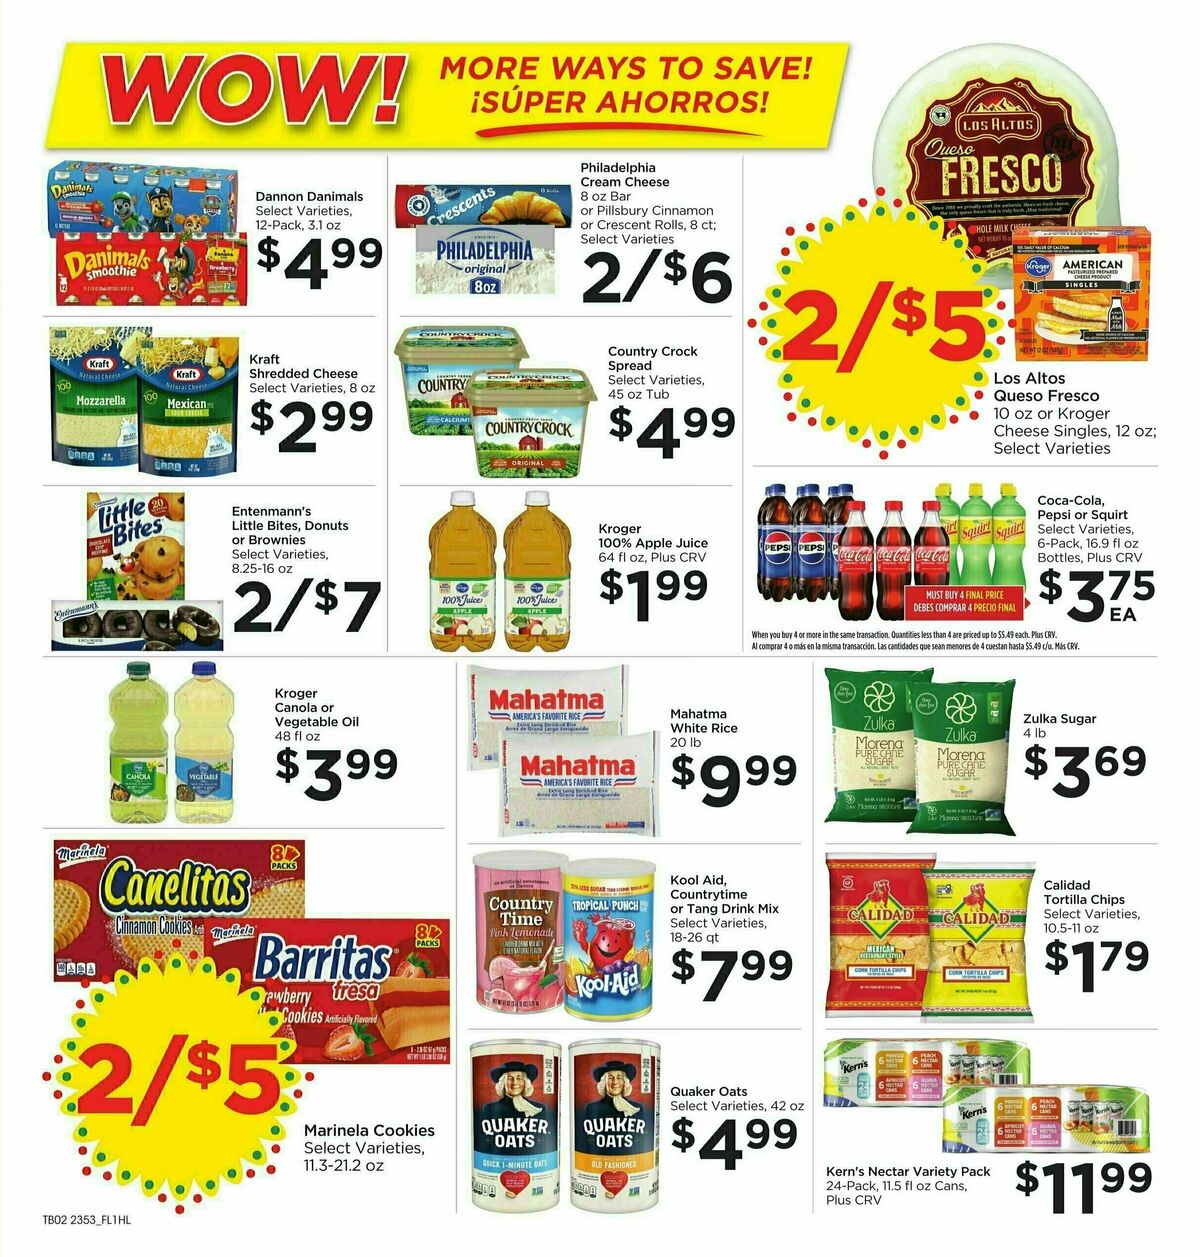 Food 4 Less Weekly Ad from January 31